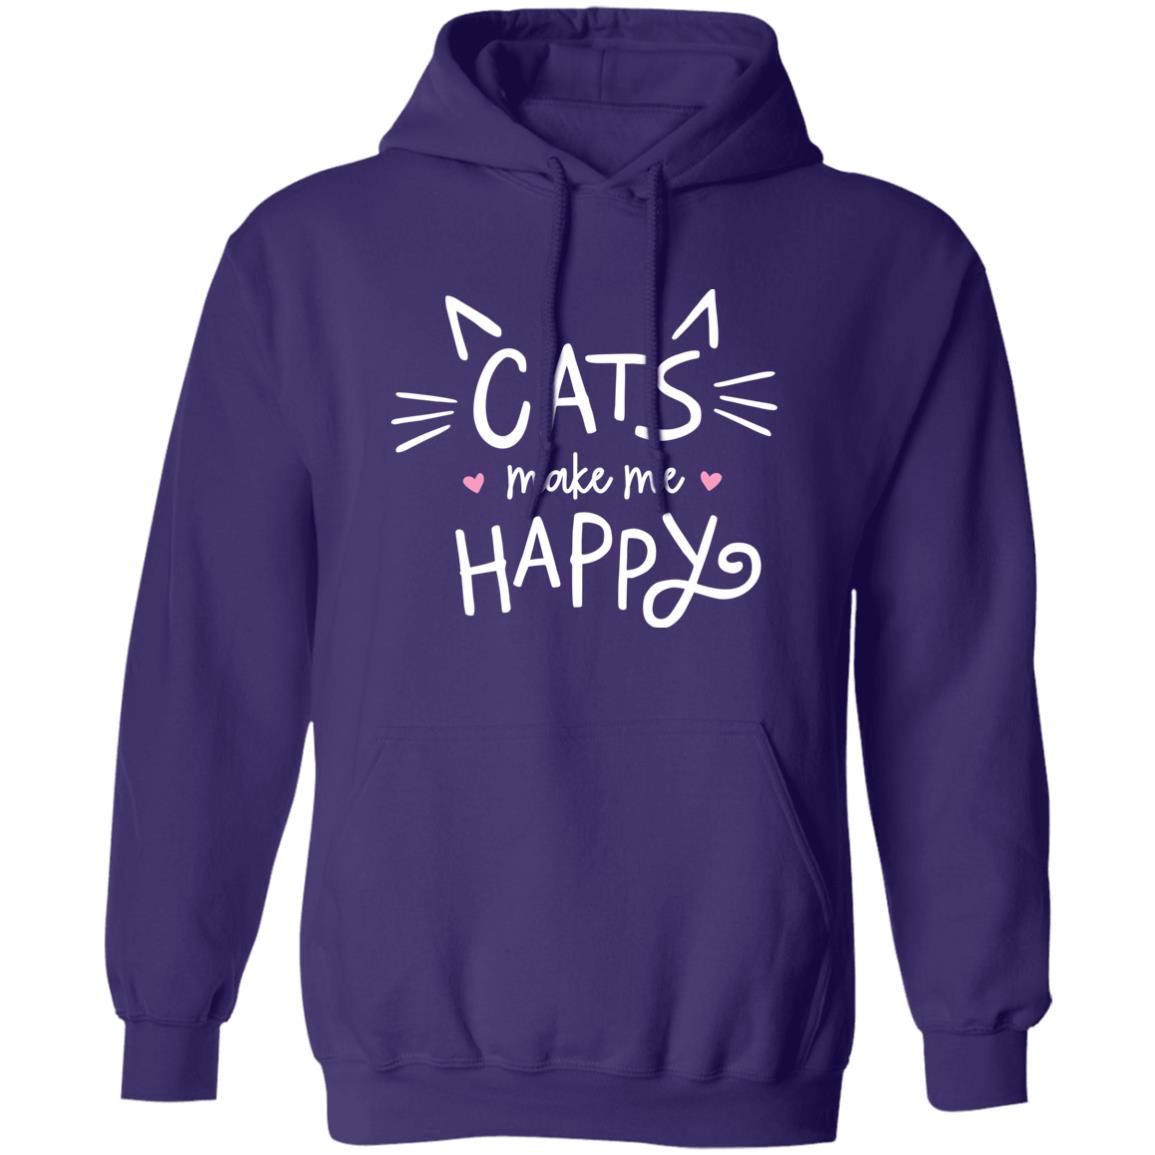 Cats Make Me Happy Pullover Hoodie Purple - iHeartCats.com